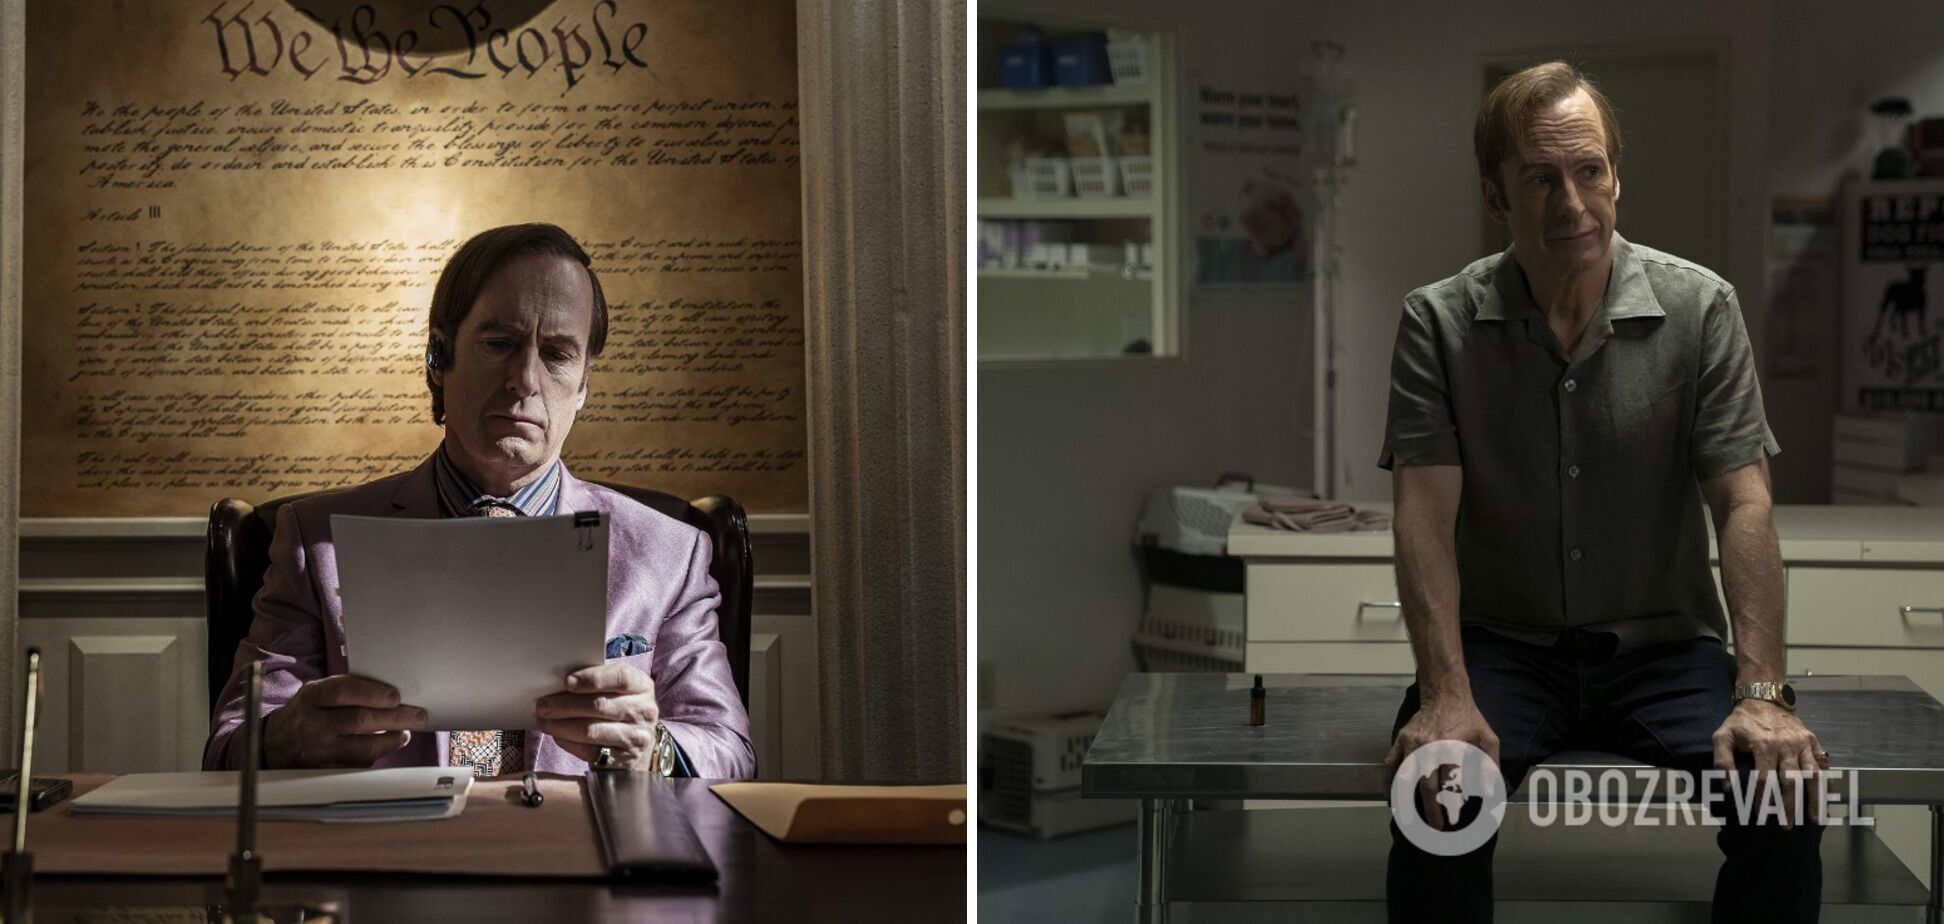 53 nominations and 0 wins: Better Call Saul set Emmys anti-record